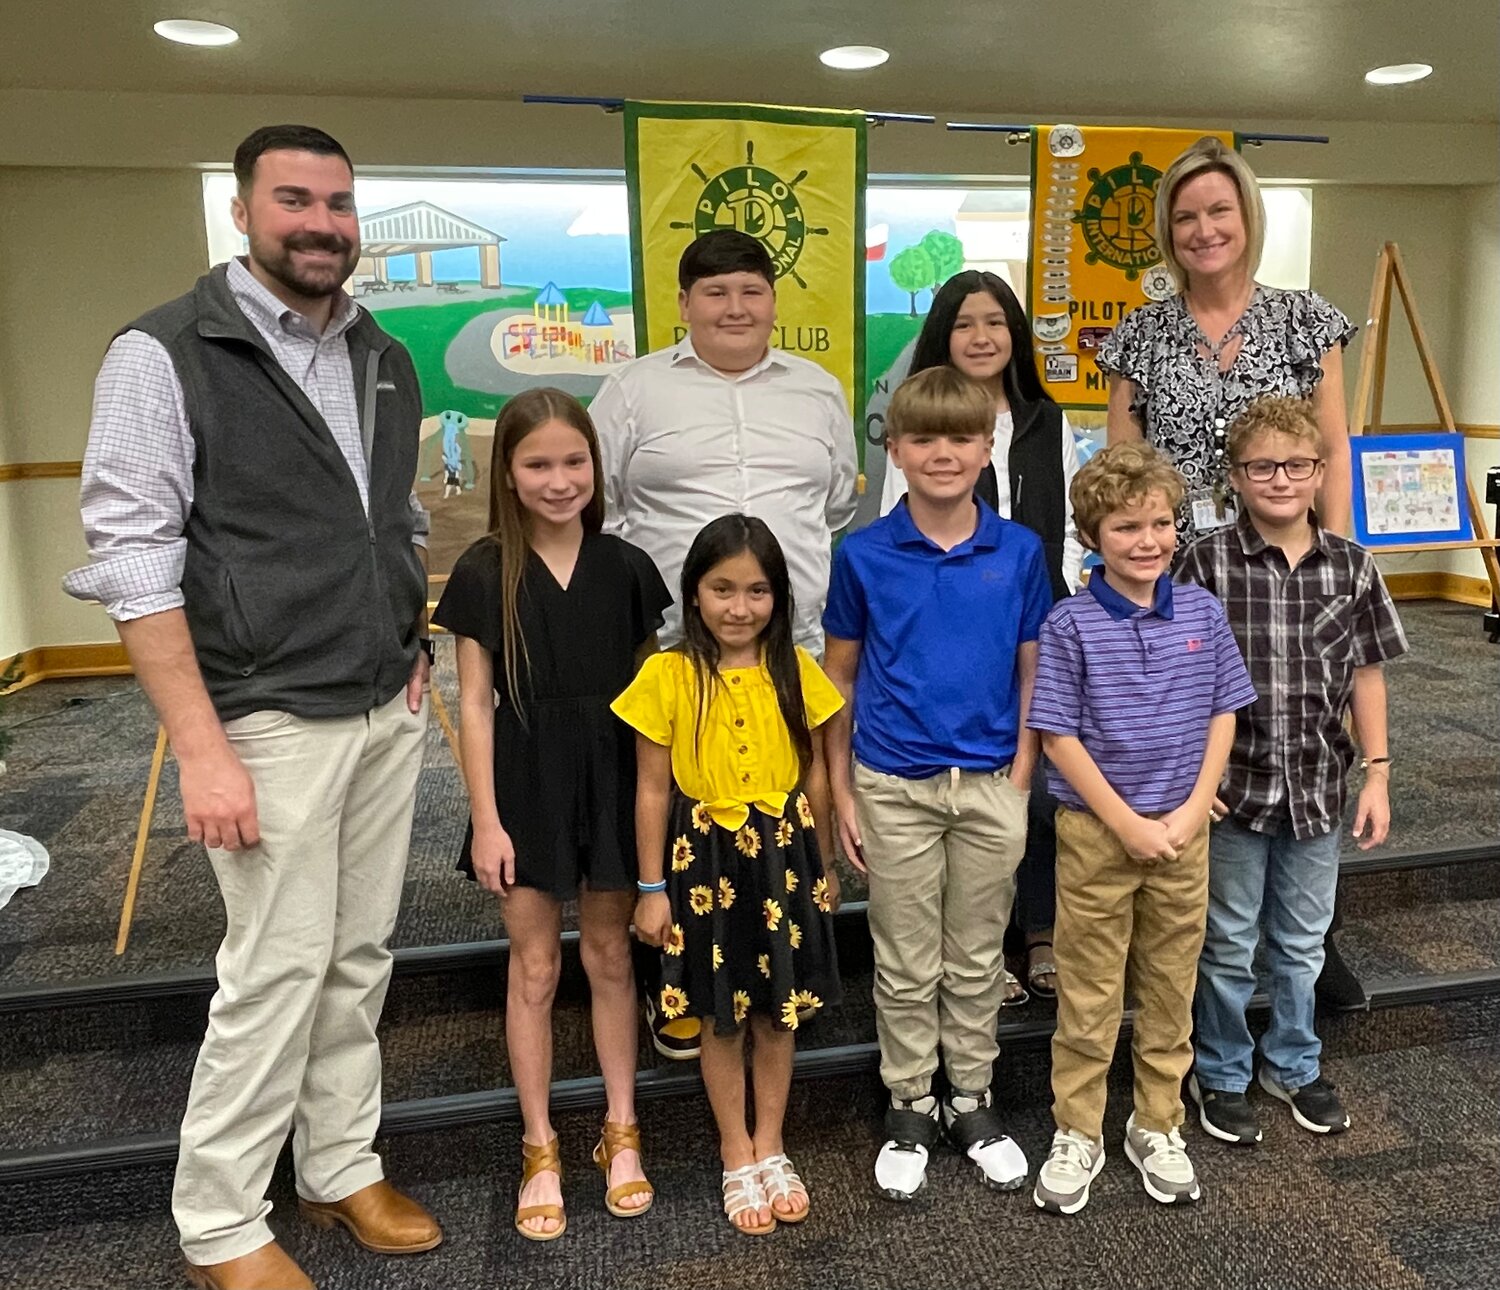 Pictured are, back from left, Assistant Mineola Elementary Principal Nick Kelley, Gio Mata Romero, Kimberly Santos, Principal Angela Shine; and, second row, Macy Lisenbe, Odessi Hernandez, John Moreland and Eason Hooton. (Not pictured are Ronald Good’Iron, Bentley Best and Penelope Barrera.)